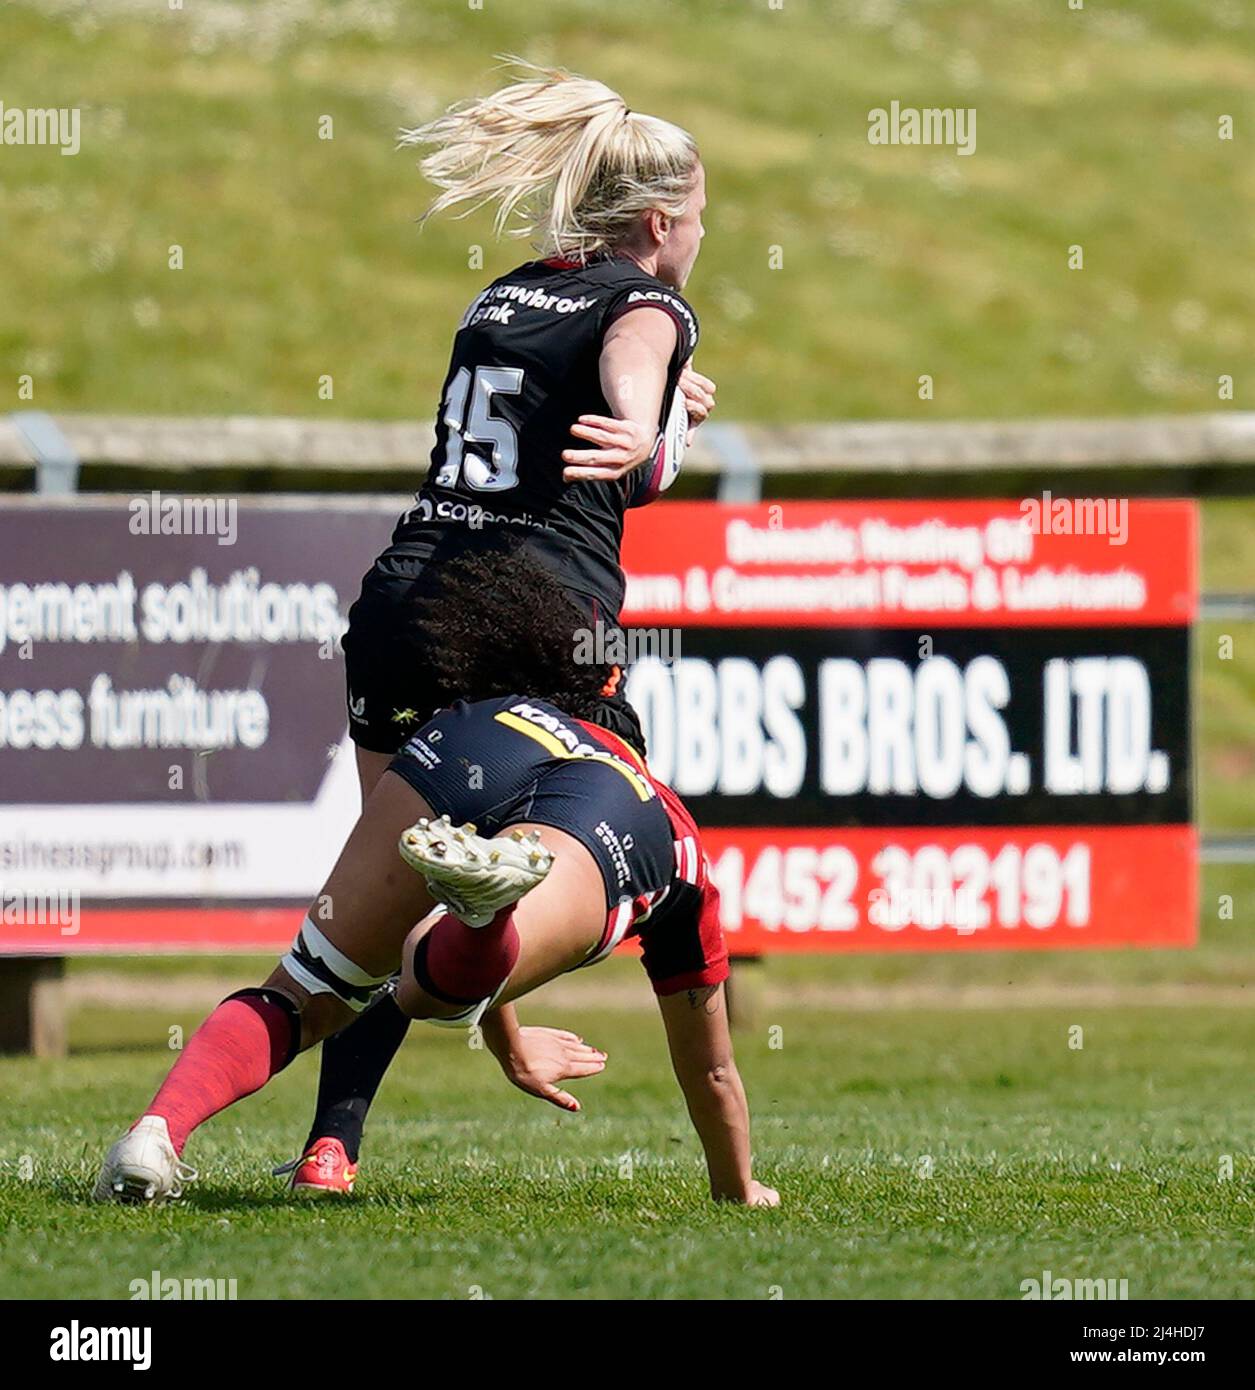 Gloucester, UK, 15, April, 2022, Chantelle Miell rompe affrontare durante Allianz 15's Cup Round Play Off's, Credit:, Graham Glendinning,/ Alamy Live News Punteggio finale: 29-15 Credit: Graham Glendinning / GlennSports/Alamy Live News Foto Stock